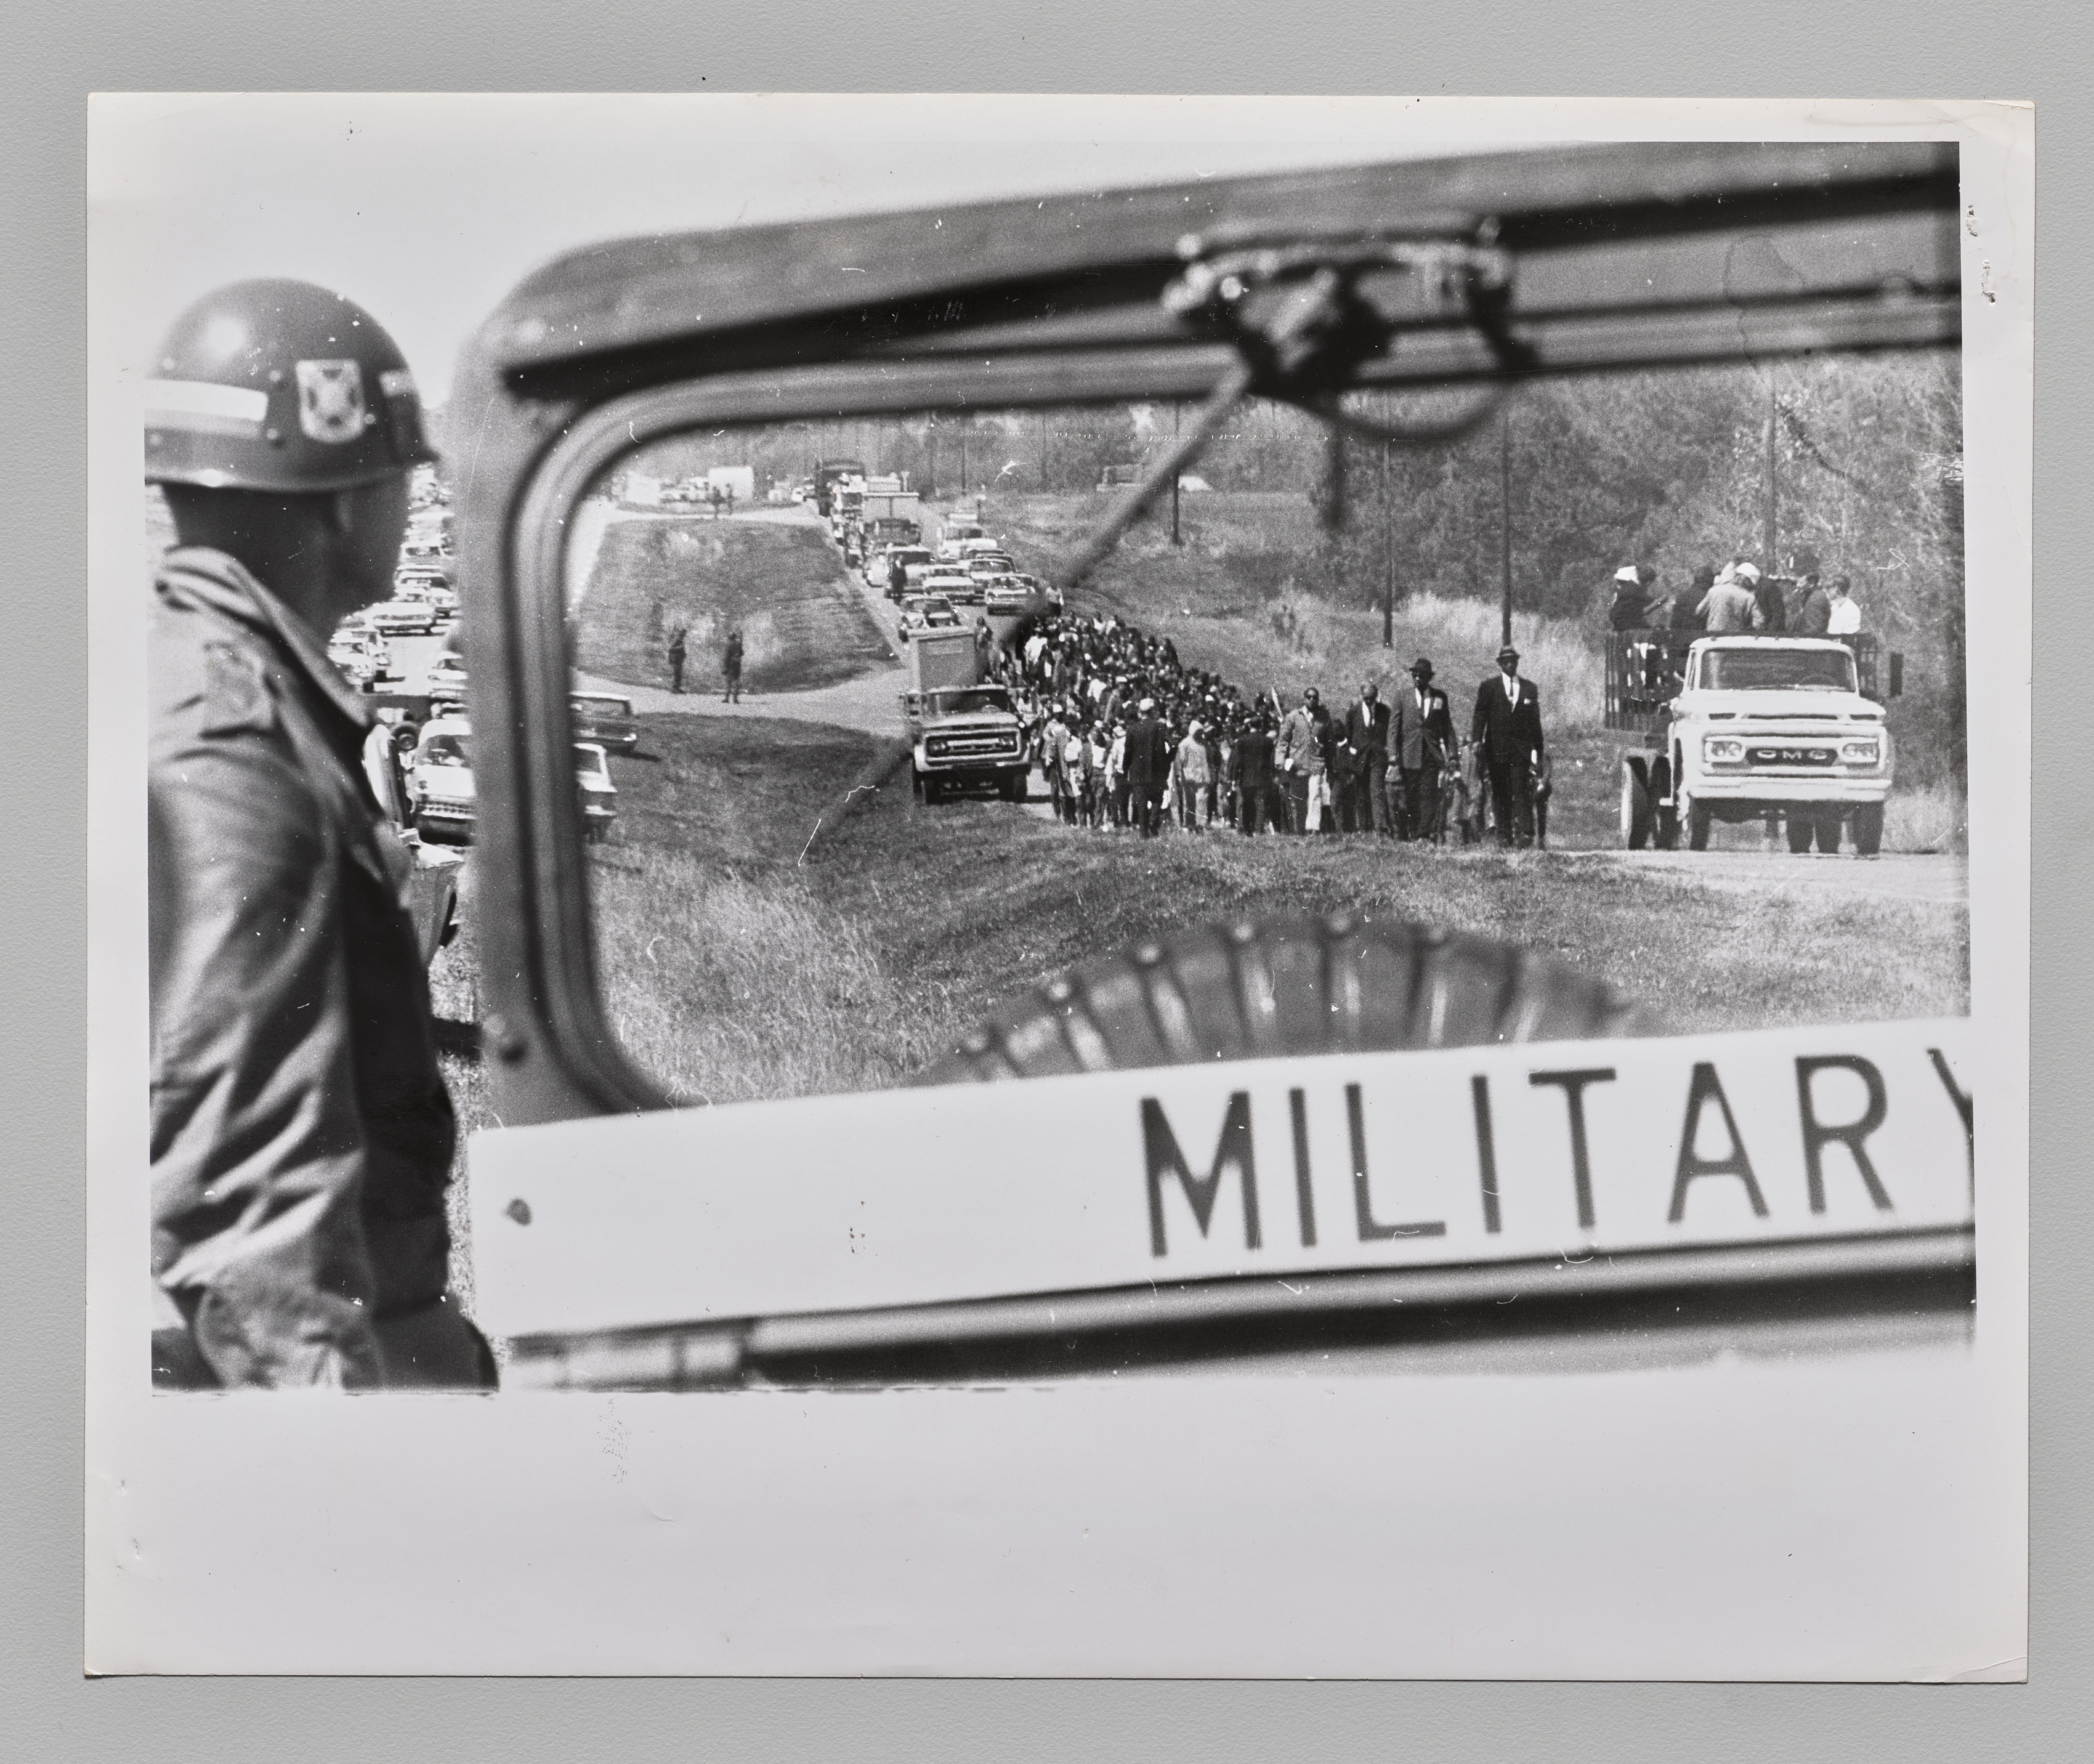 Marchers Continue Their Hike: Under the watchful eye of an Army military police, ordered out by President Johnson, civil rights marchers continue their 50-mile walk along Route 80 from Selma to Montgomery, Alabama today. Other soldiers stand guard at intersections in background, March 22, 1965